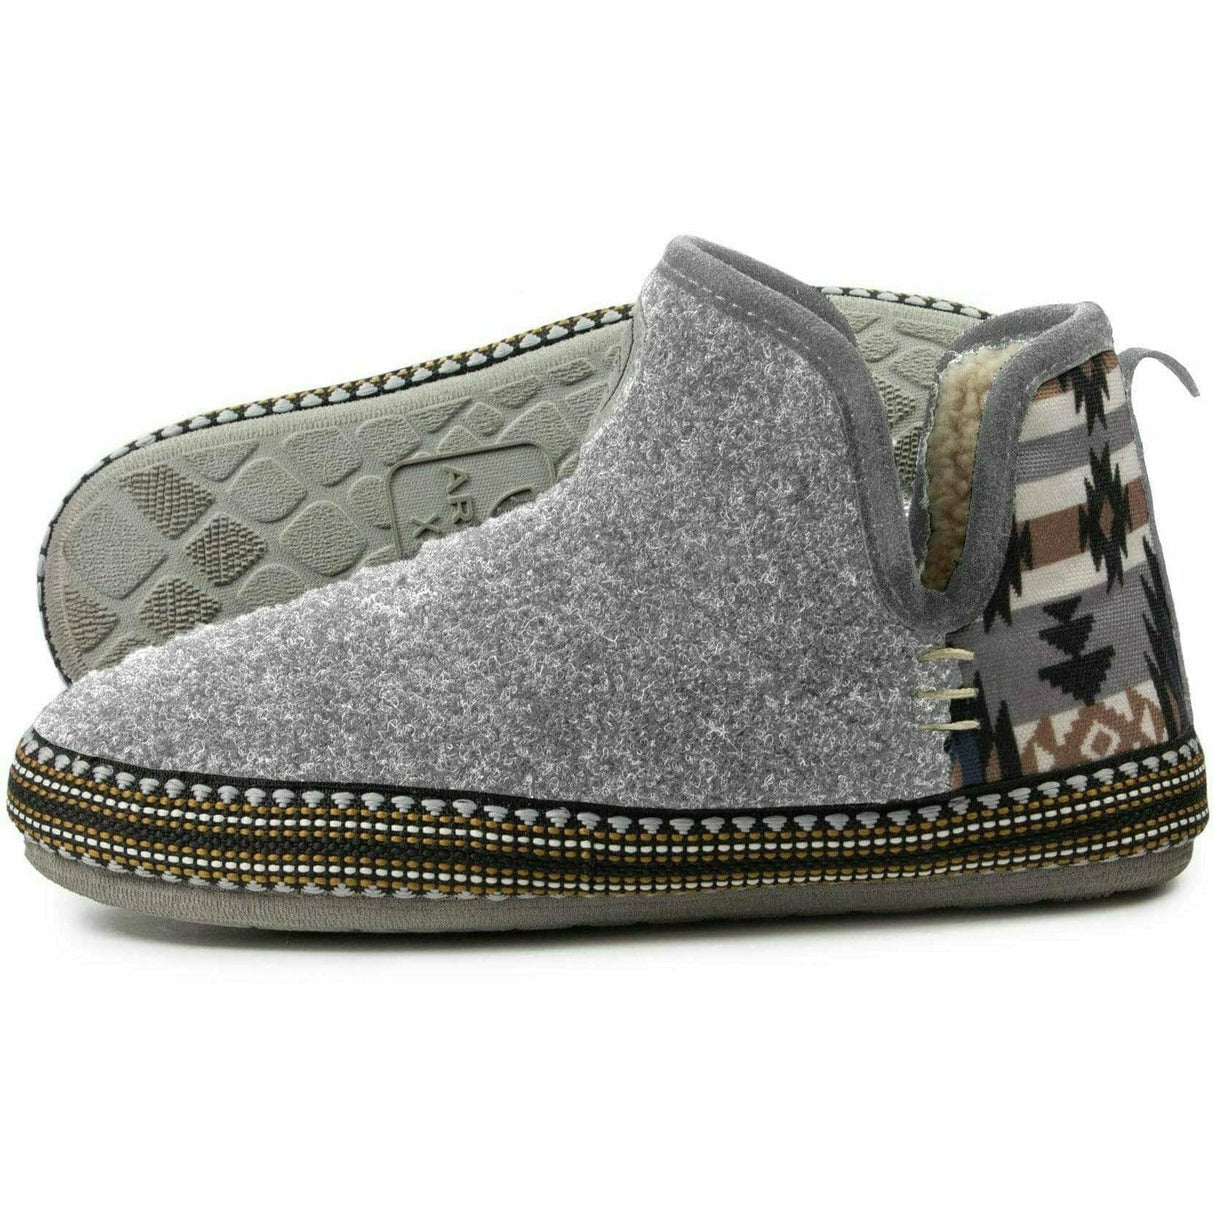 Ariat Womens Bootie Slippers - Clearance  -  X-Small / Charcoal Southwest